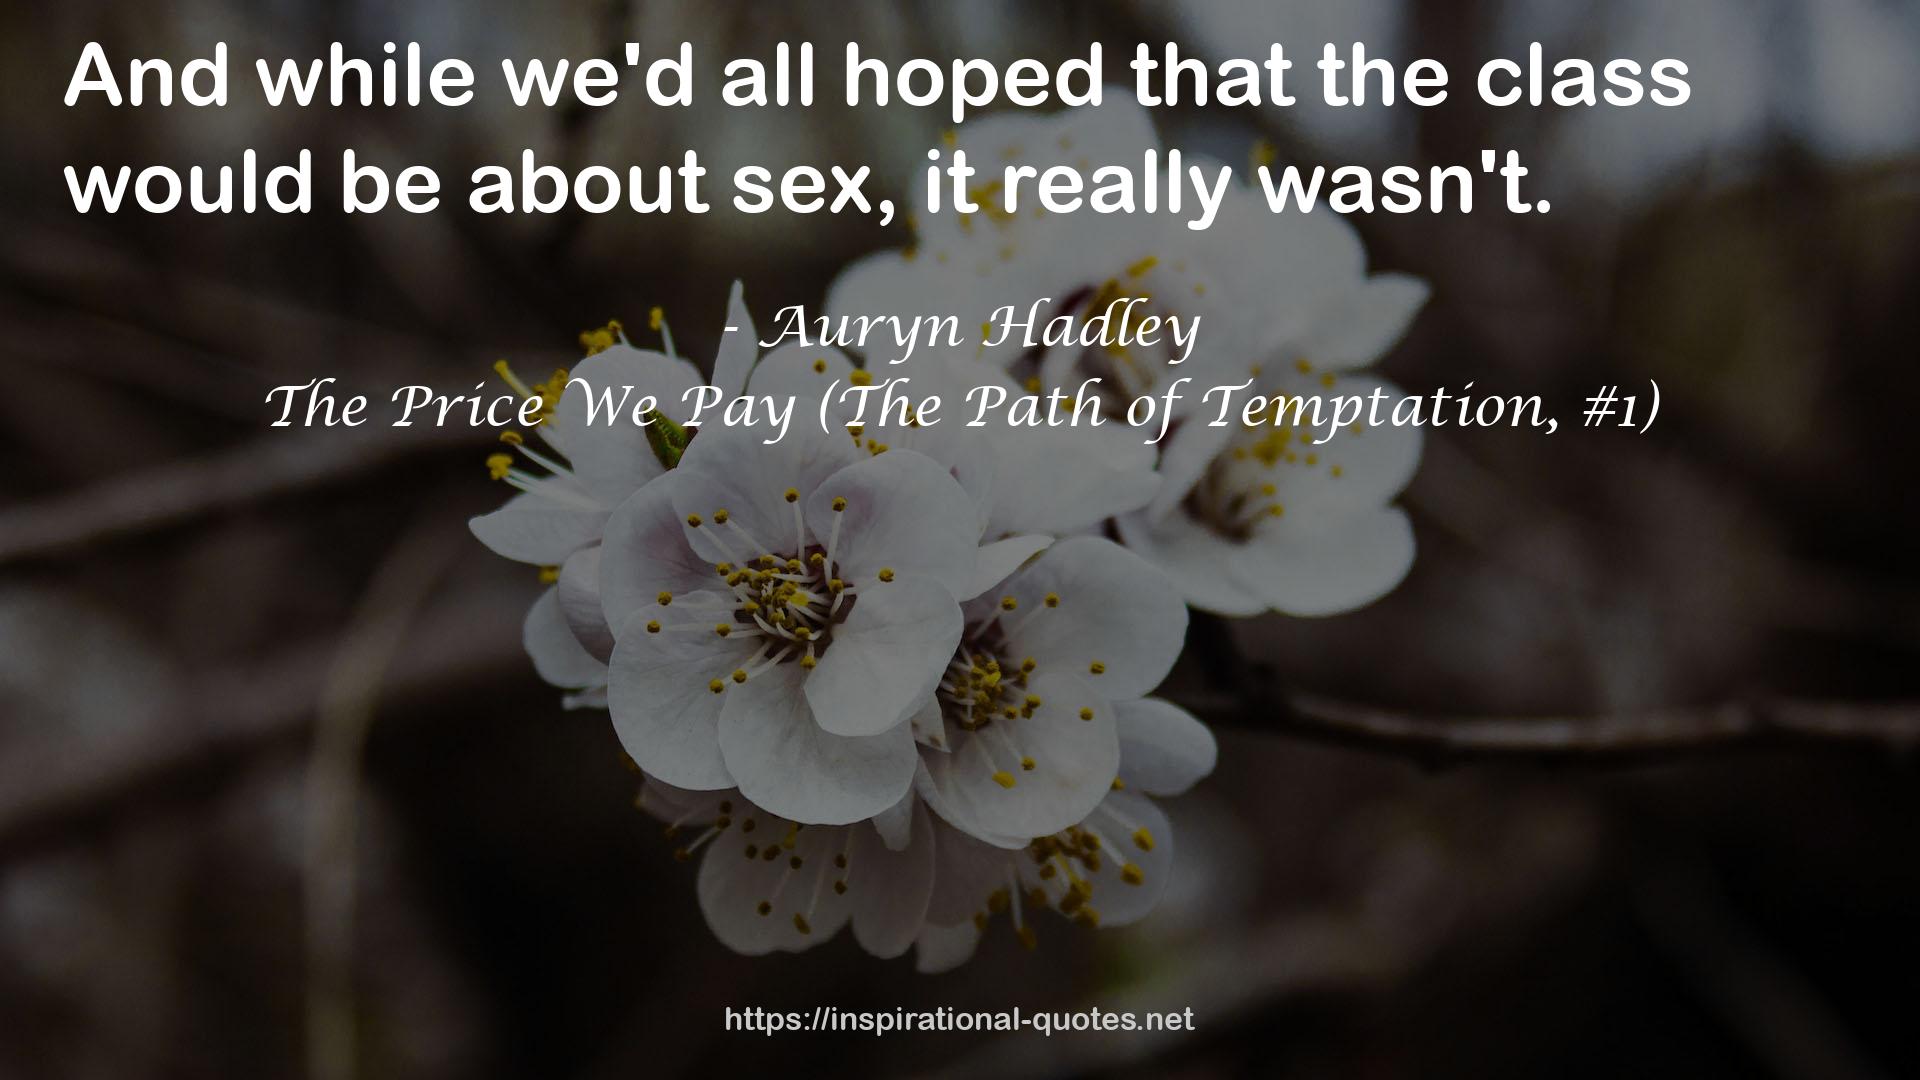 The Price We Pay (The Path of Temptation, #1) QUOTES